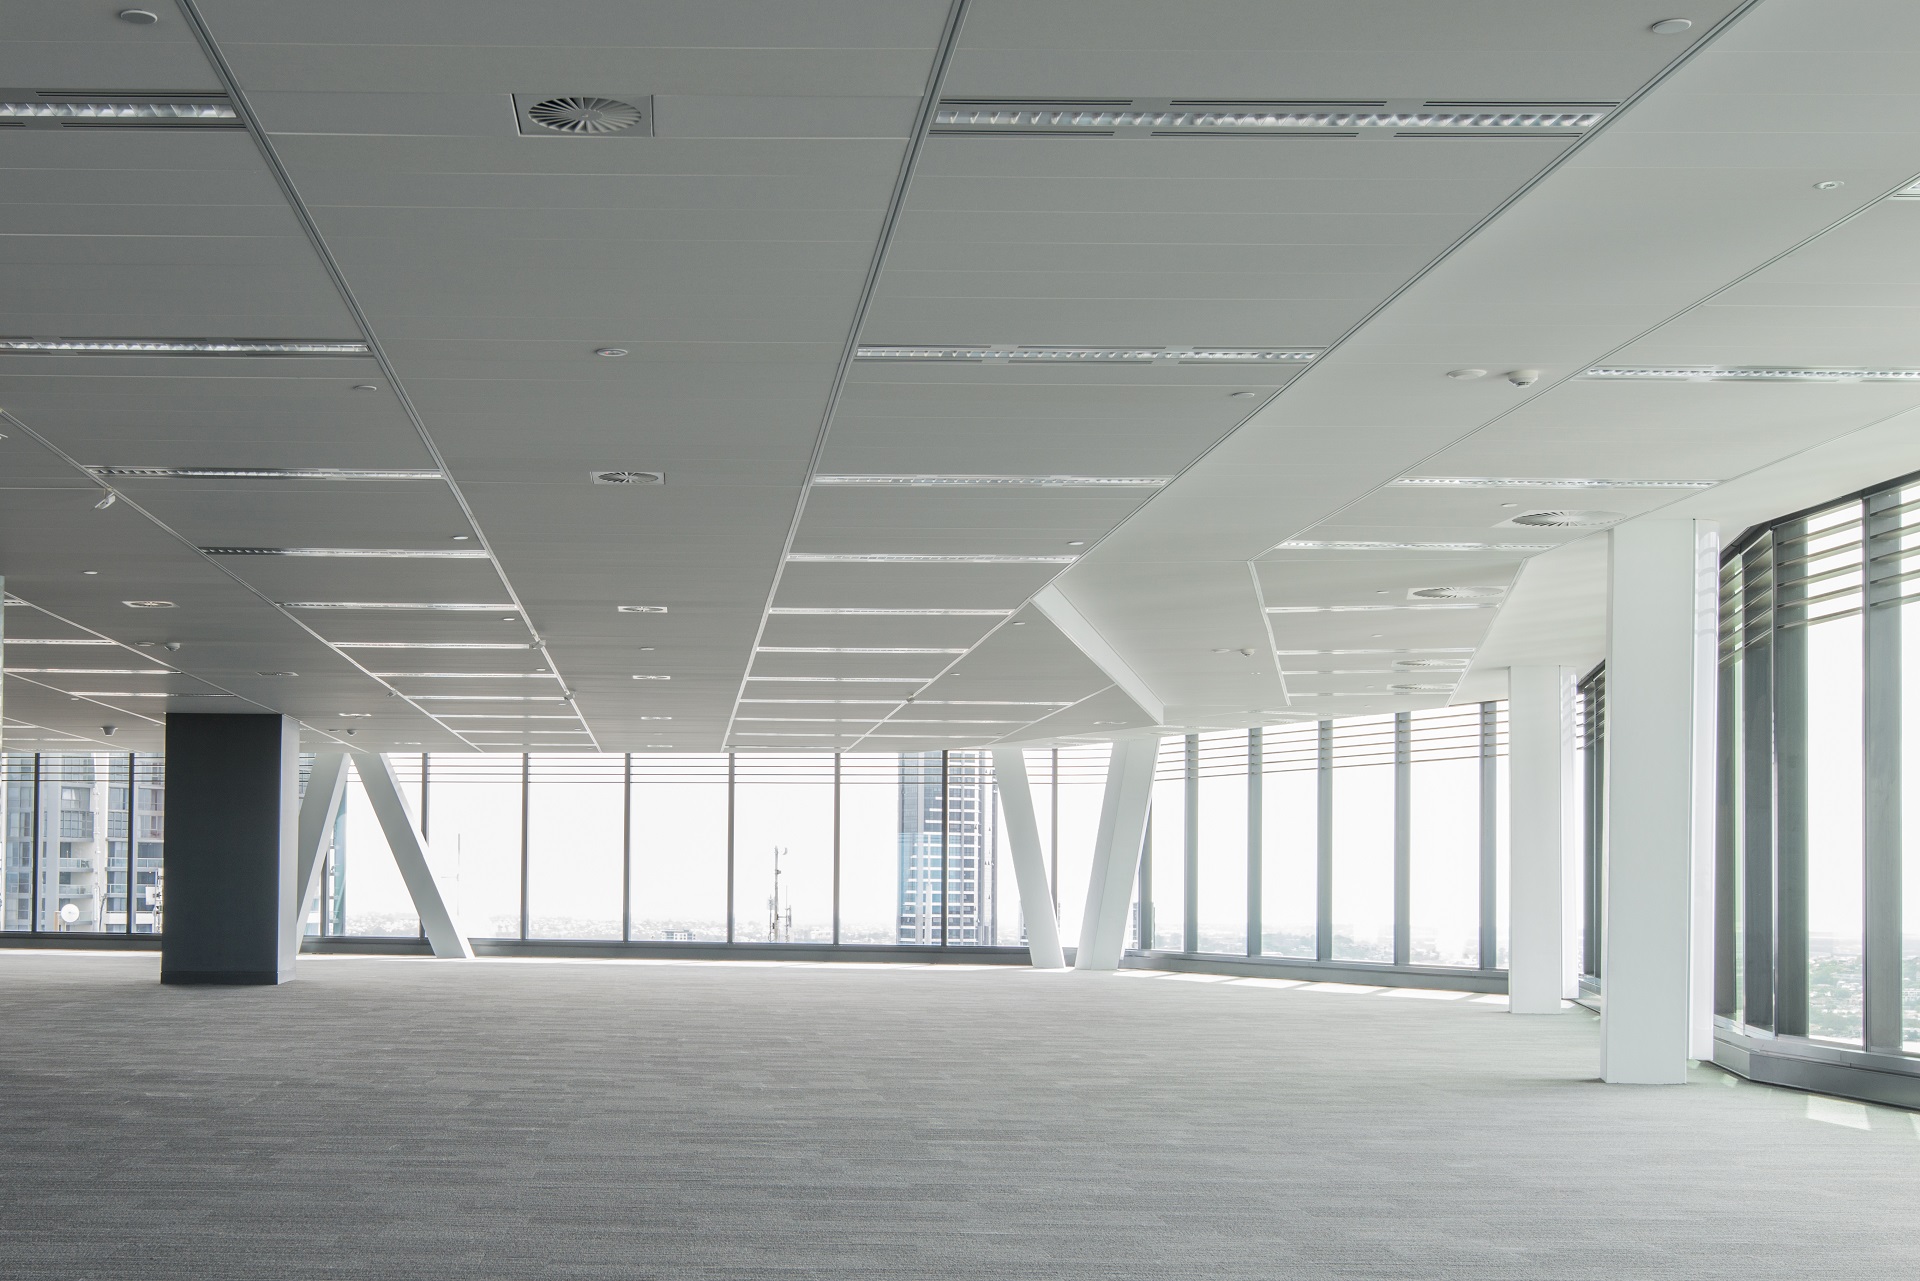 Modular metal ceilings are common in commercial spaces and public infrastructure